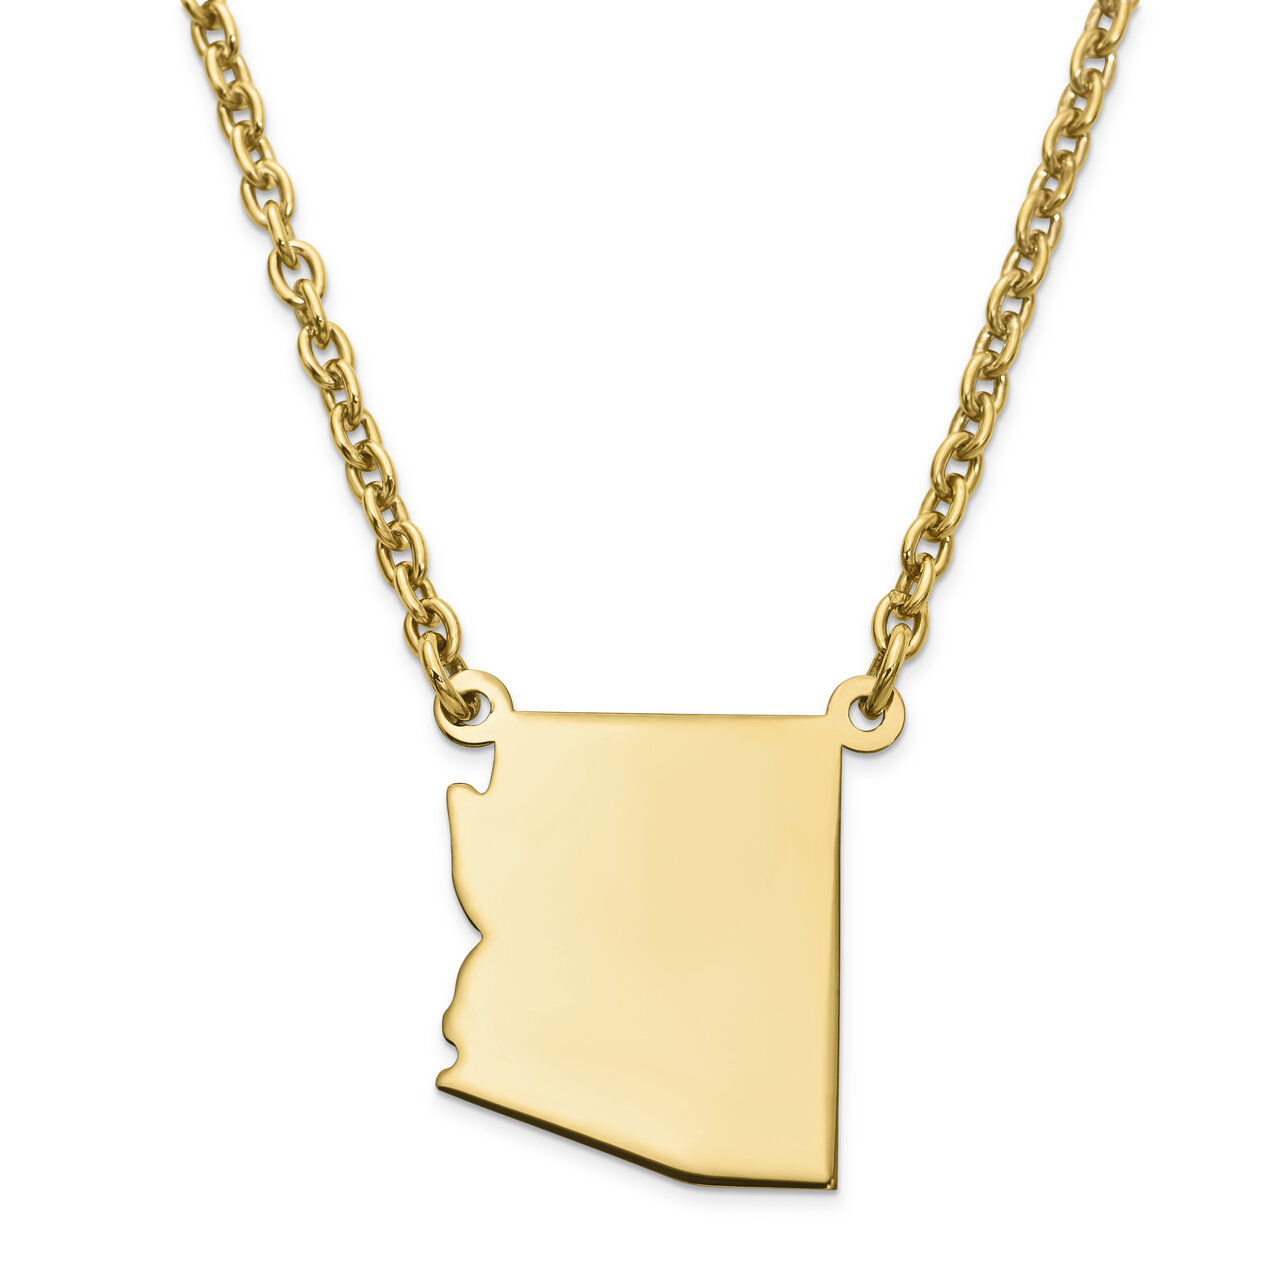 Arizona State Pendant Necklace with Chain 14k Yellow Gold Engravable XNA706Y-AZ